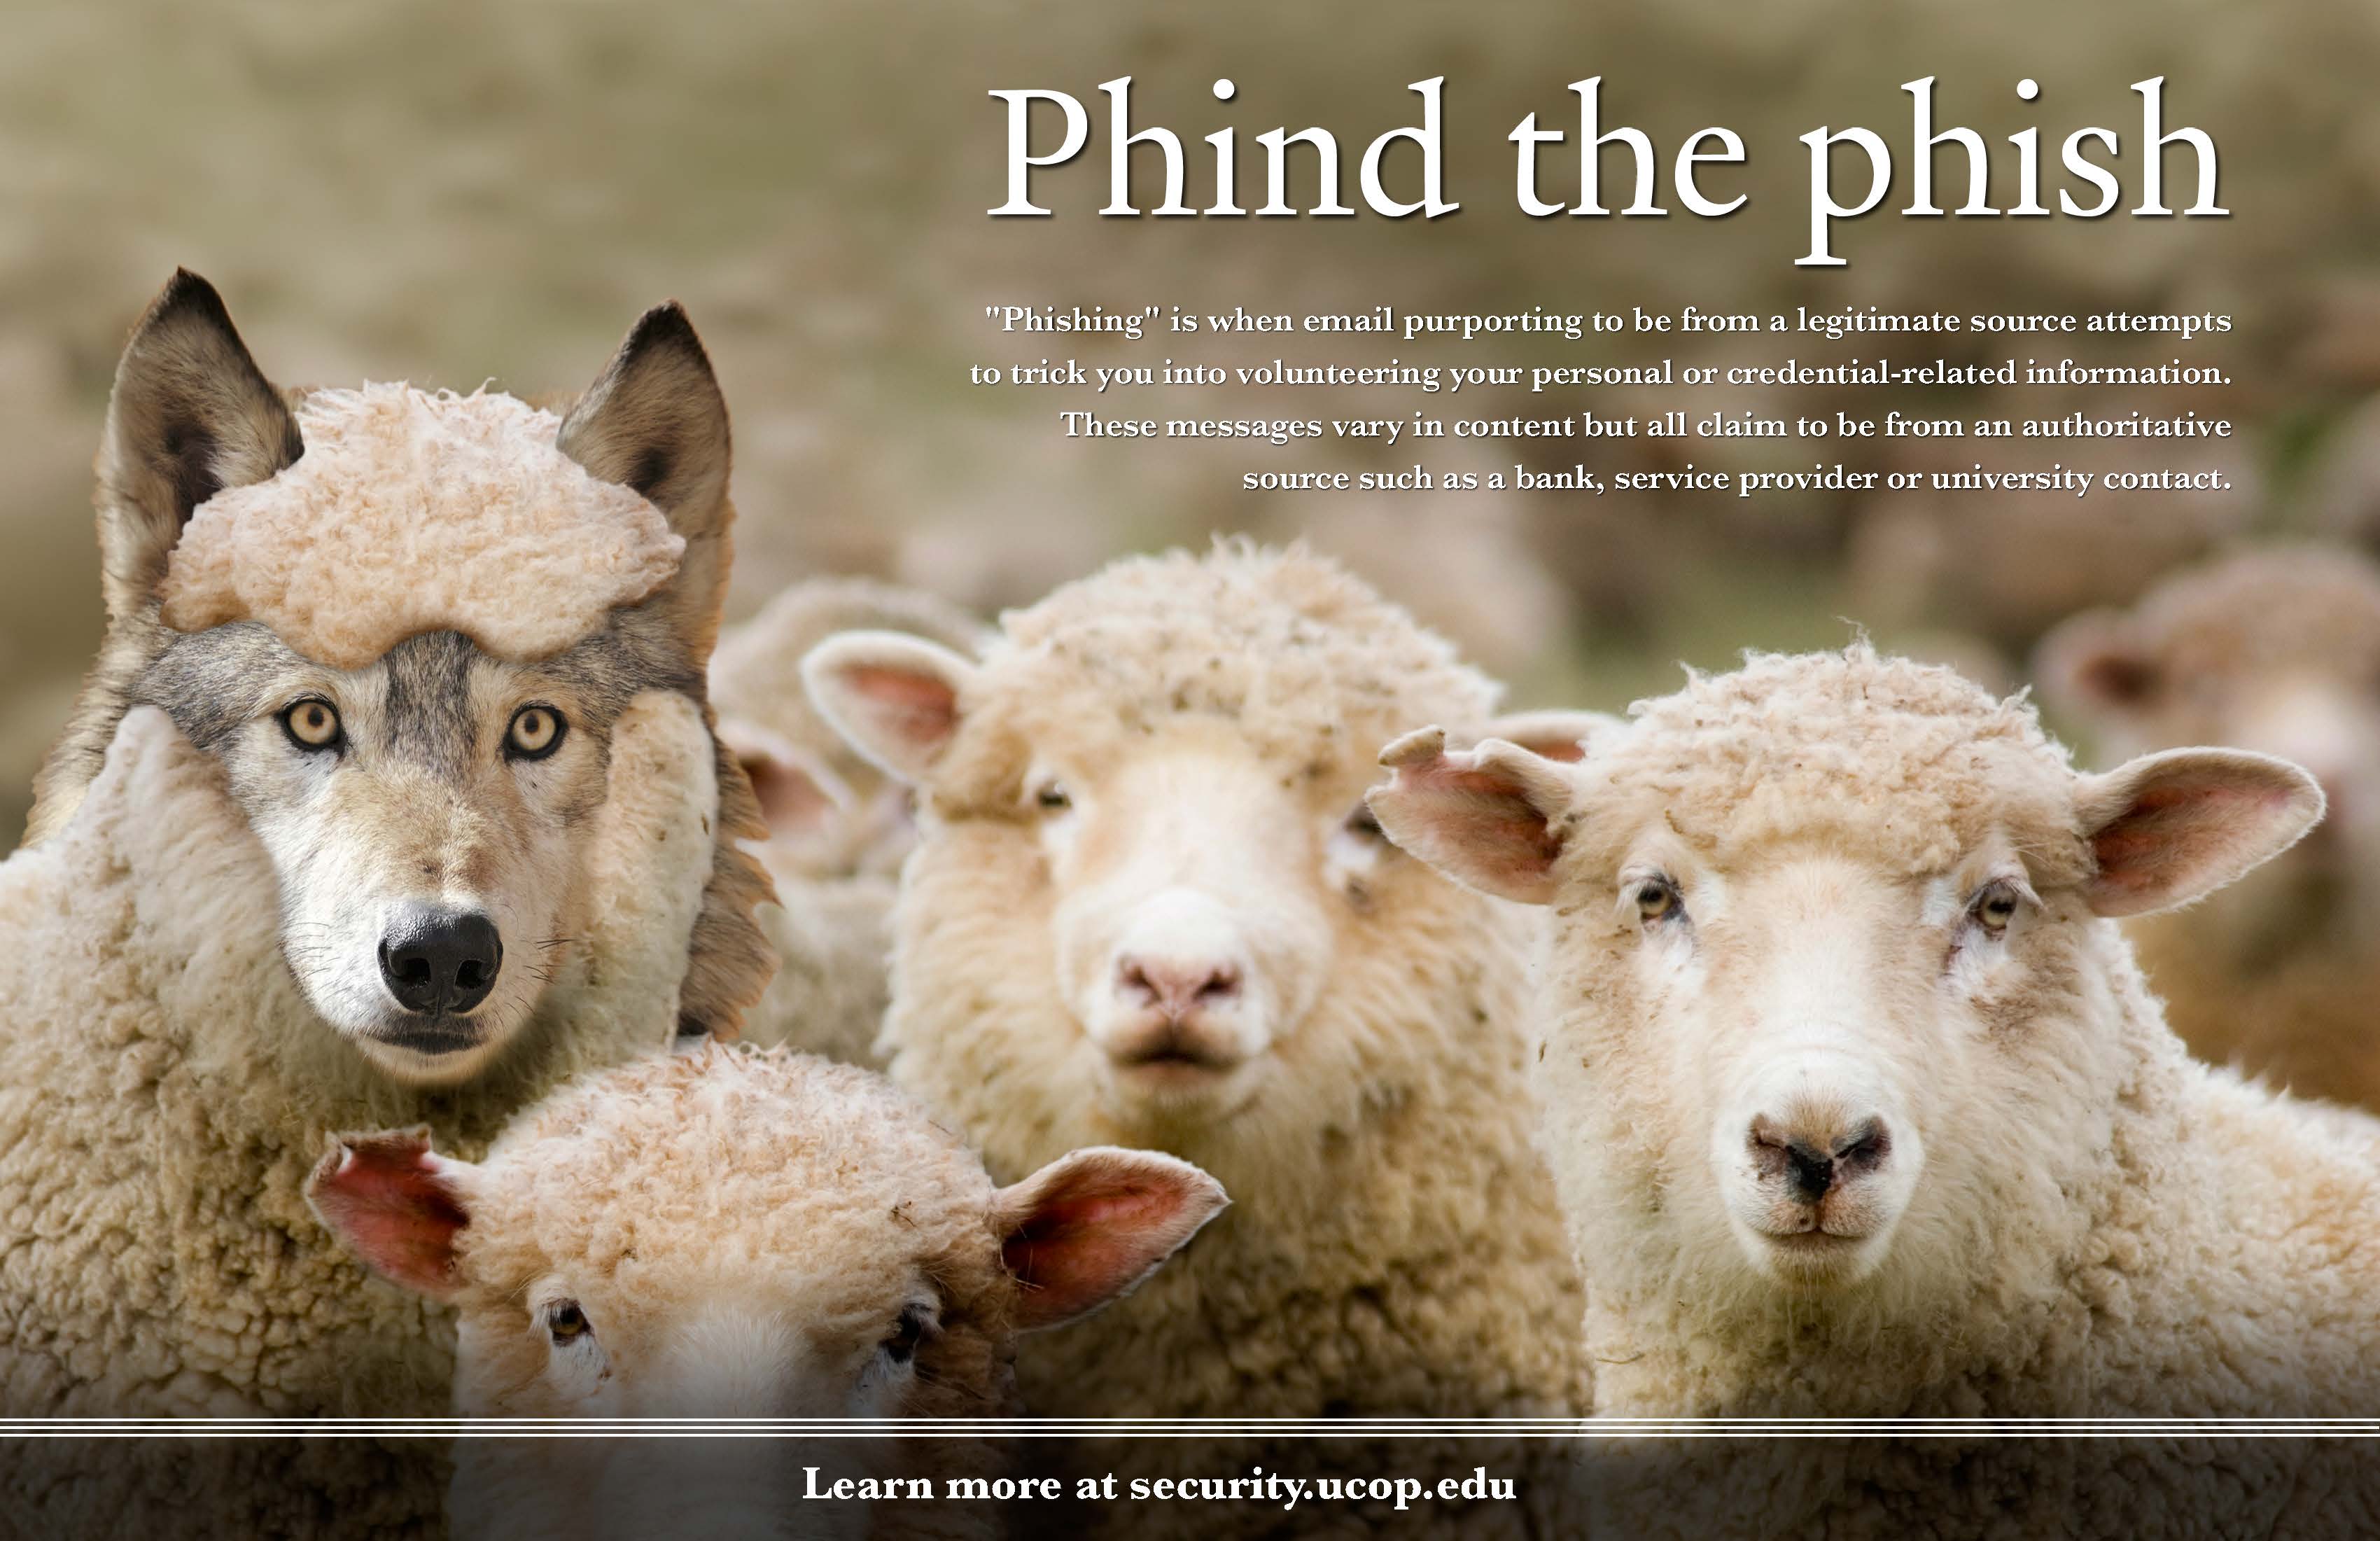 Phind the phish - Sheep-wolf